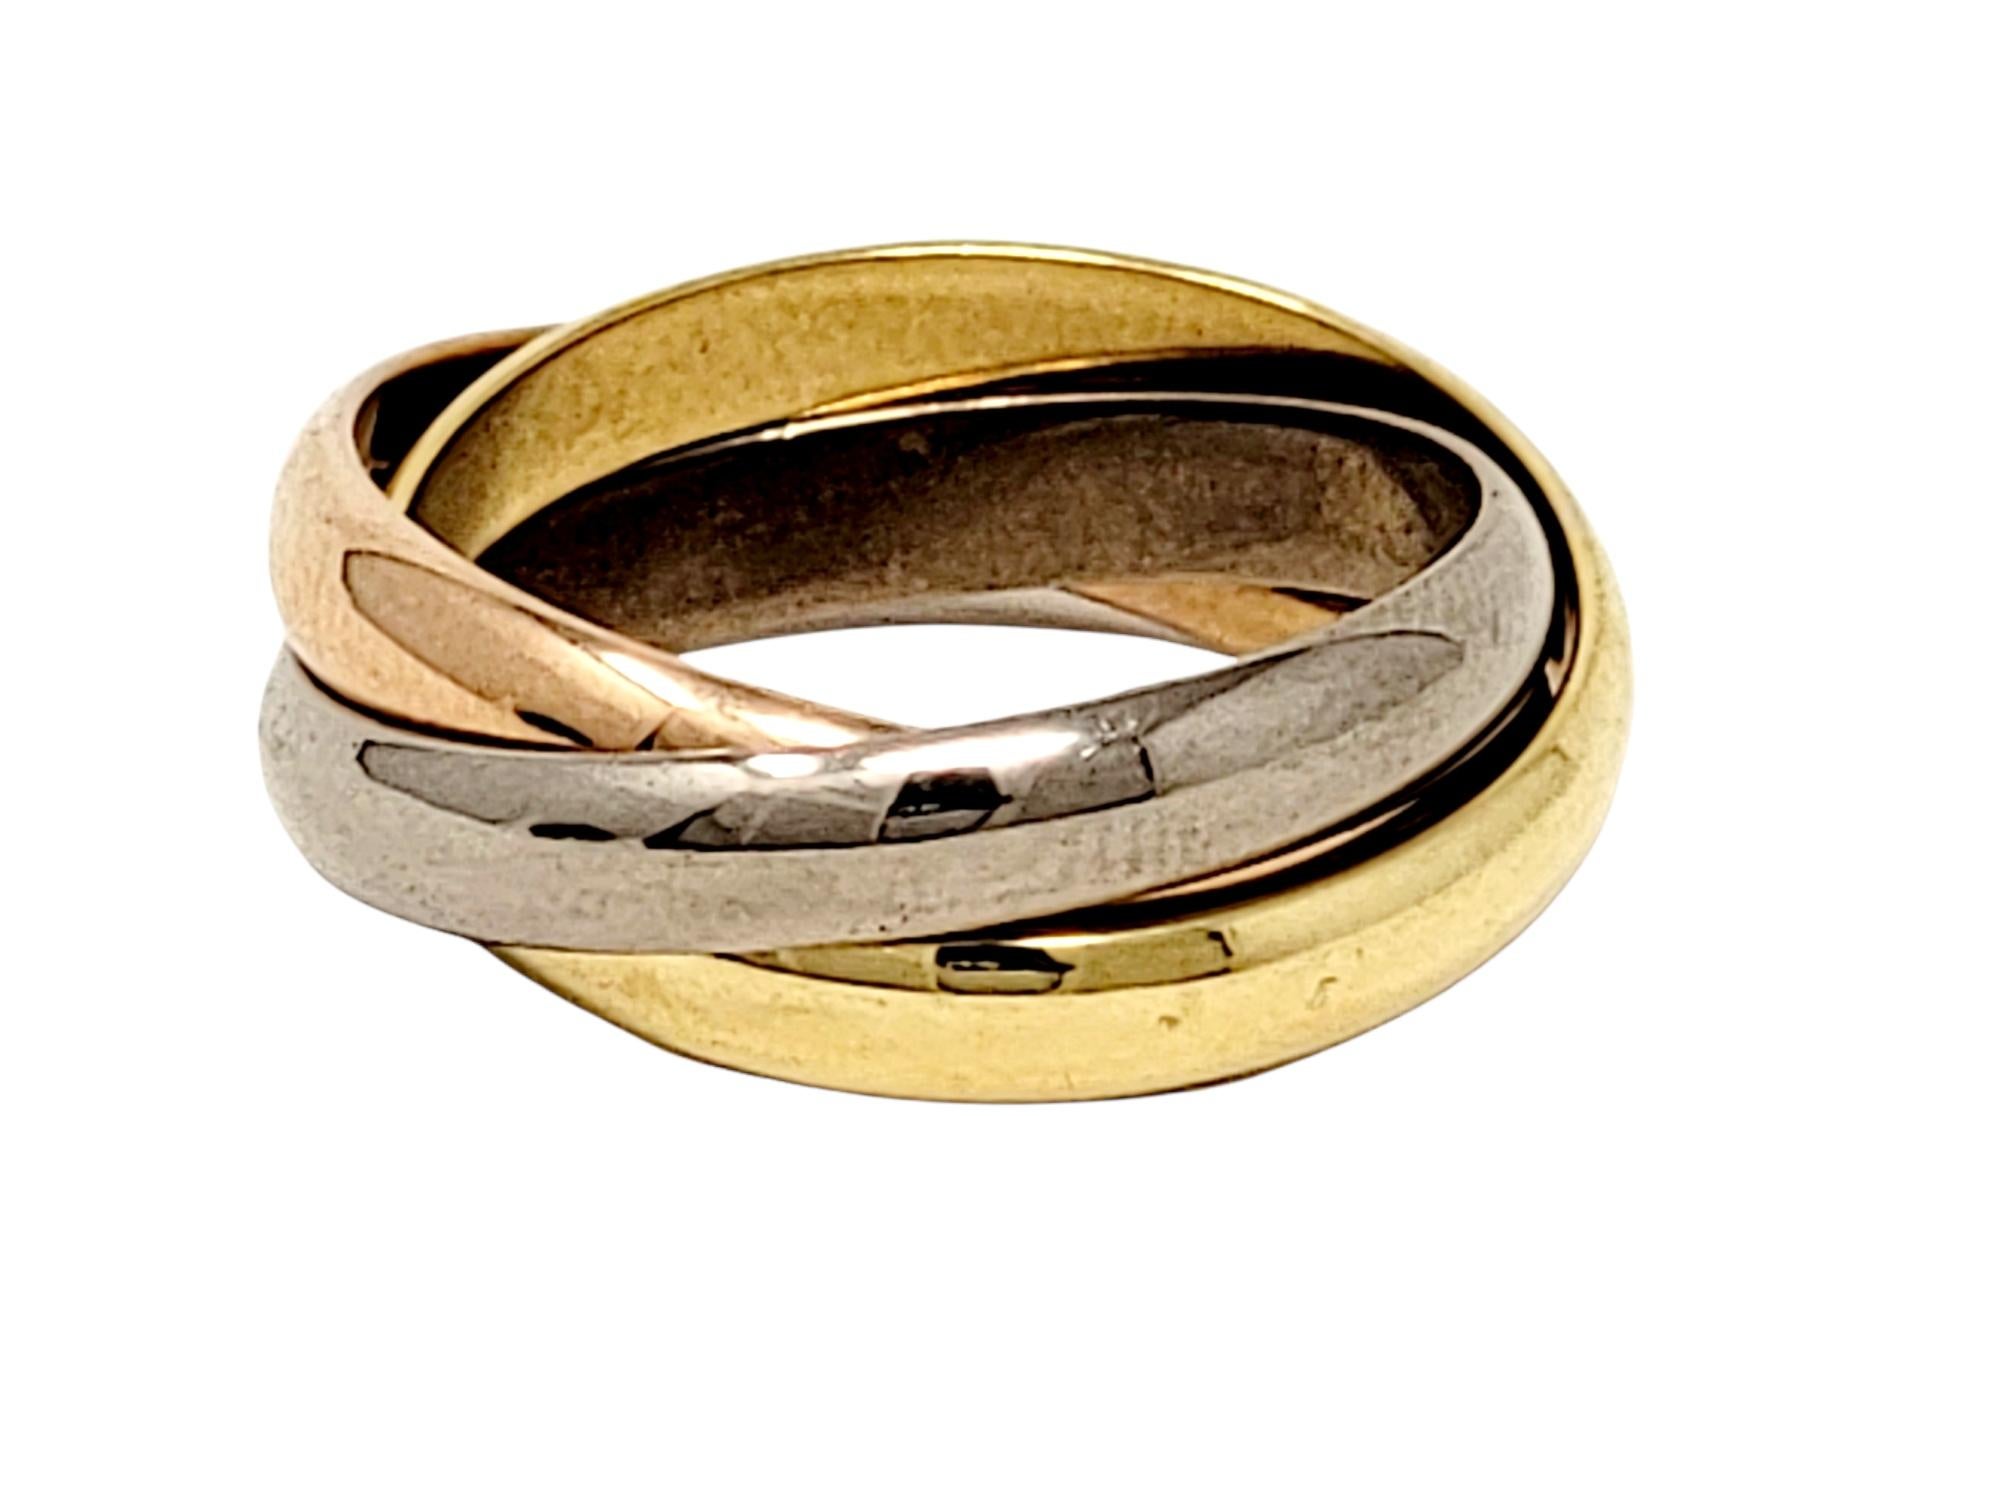 Popular Cartier Classic Trinity multi band tri-color ring set symbolizing love, fidelity and friendship. 

Ring type: Band
Metal: 18K Yellow, White and Rose Gold
Weight: 9.3 grams
Size: 56
U.S. Ring Size: 7.5
Individual band width: 3.53 mm
Stamped: